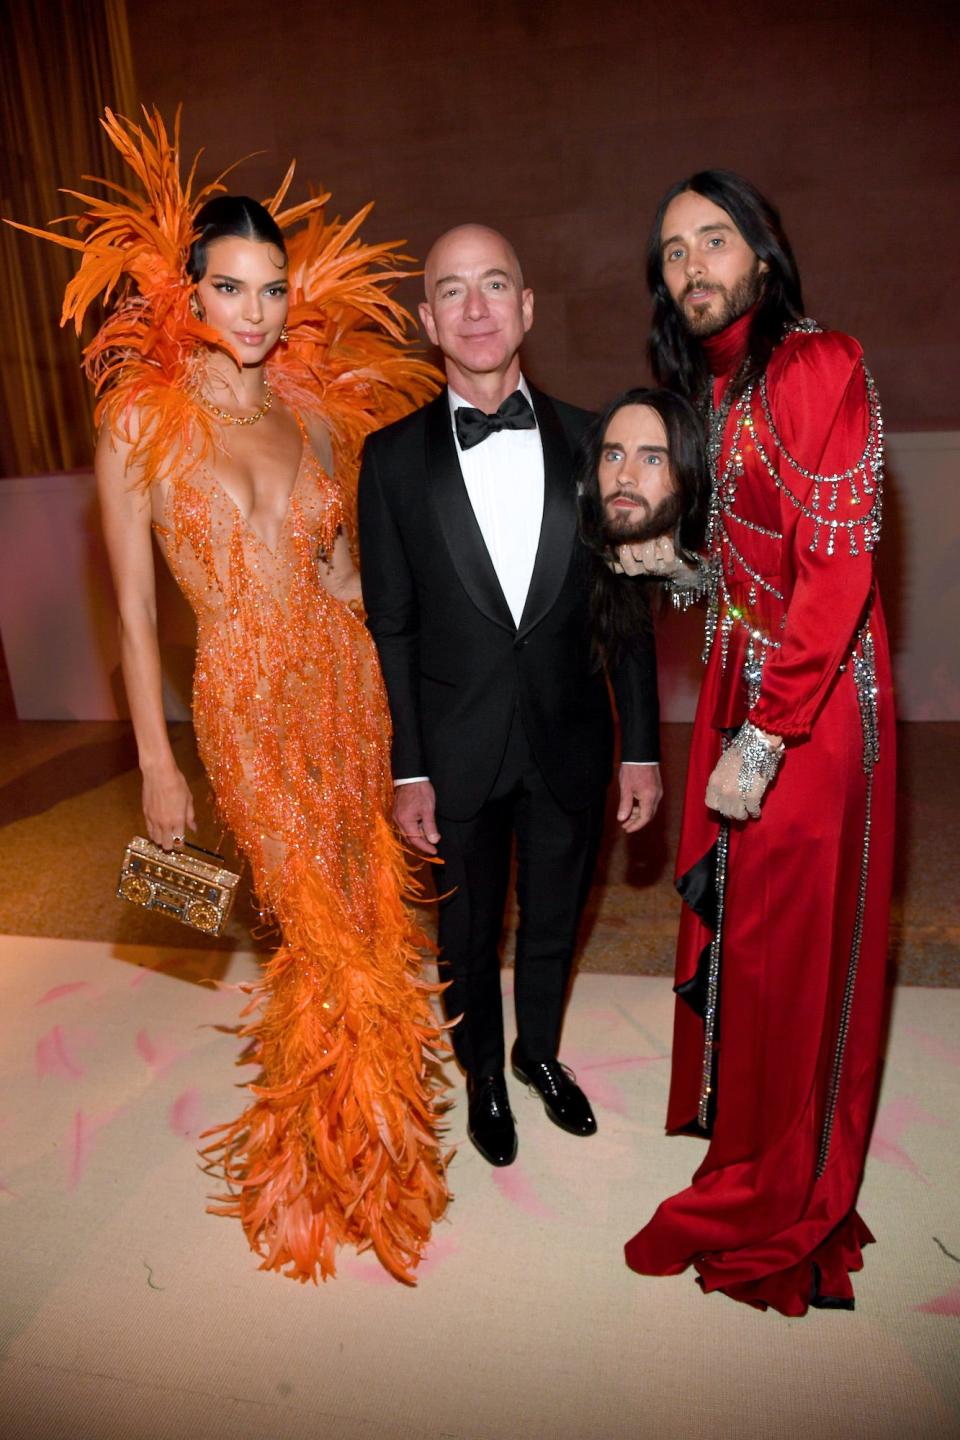 Kendall Jenner, Jeff Bezos, and Jared Leto attend the 2019 Met Gala.